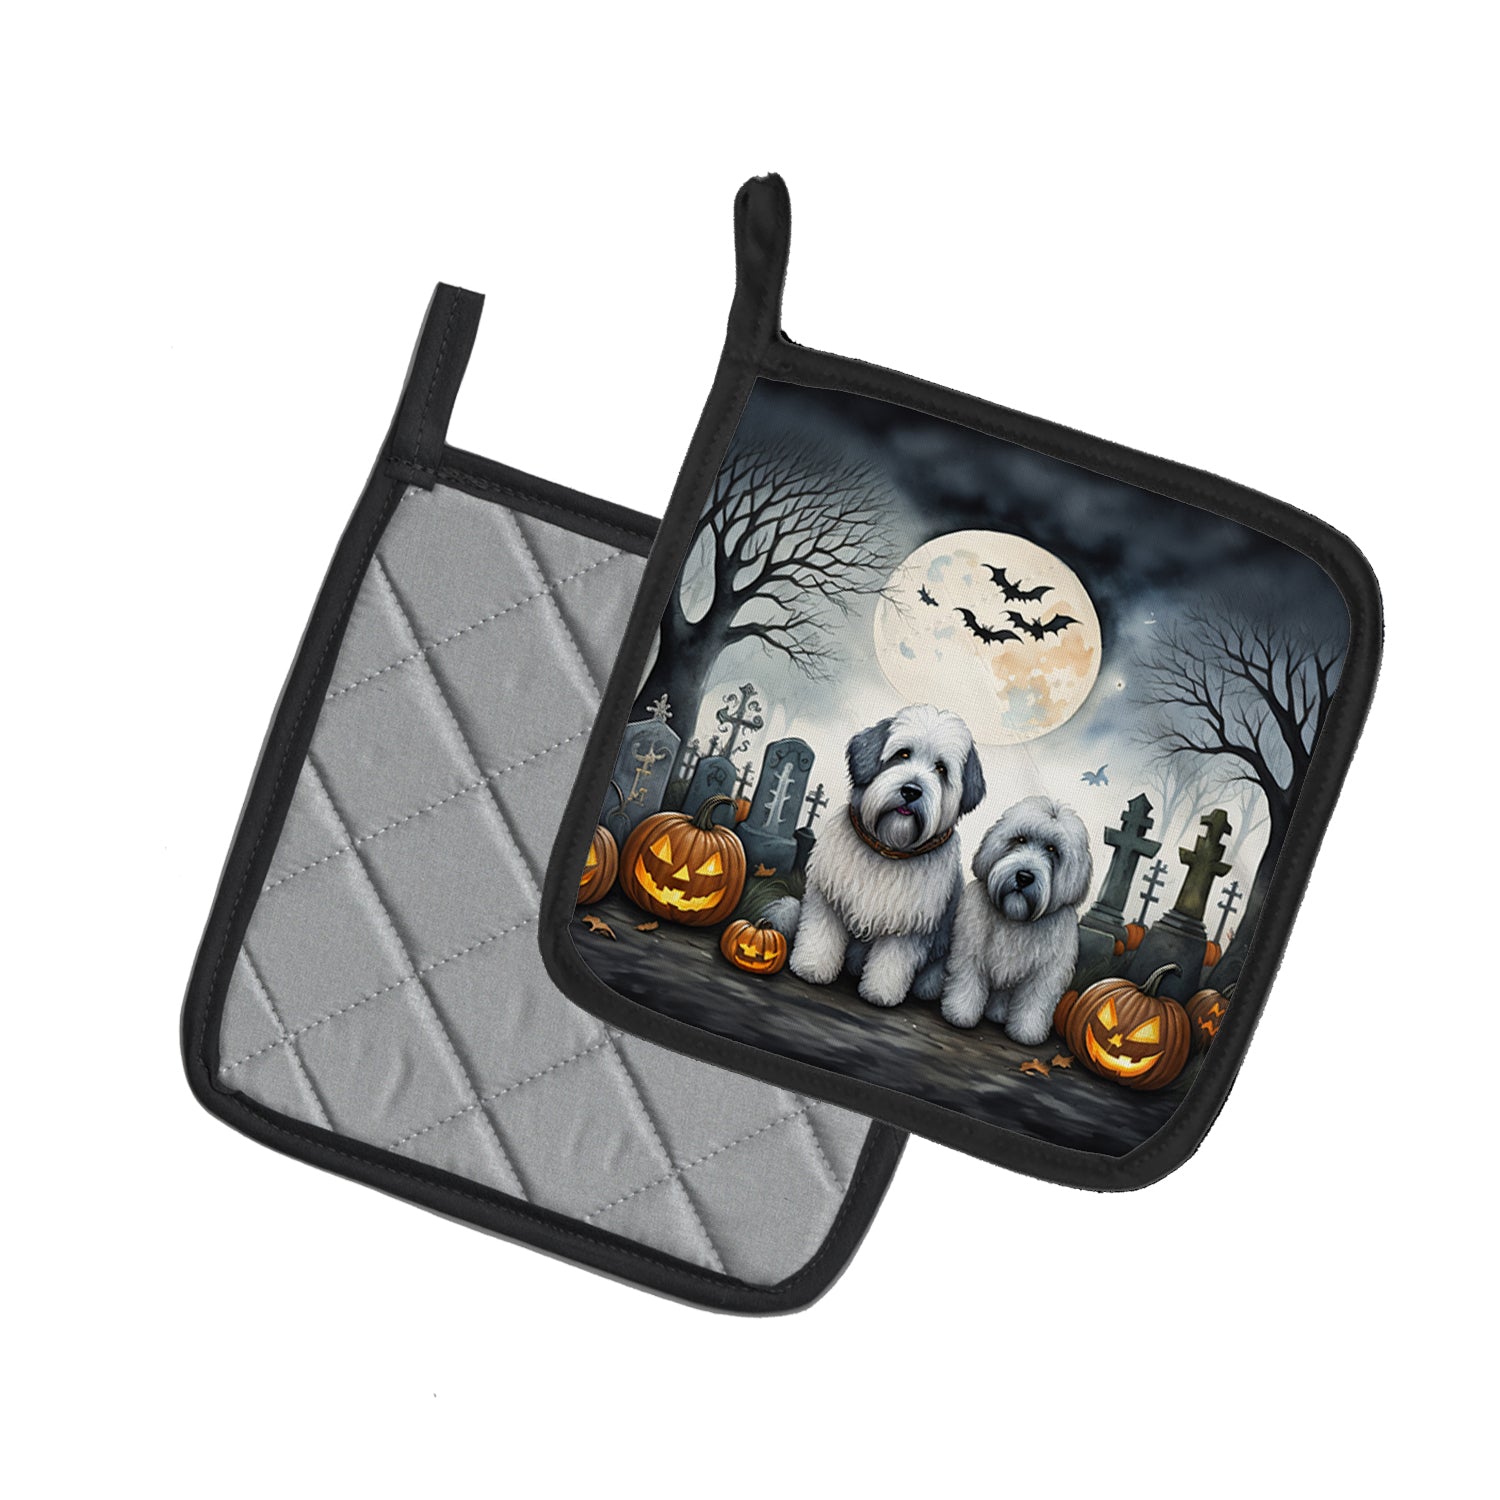 Buy this Old English Sheepdog Spooky Halloween Pair of Pot Holders